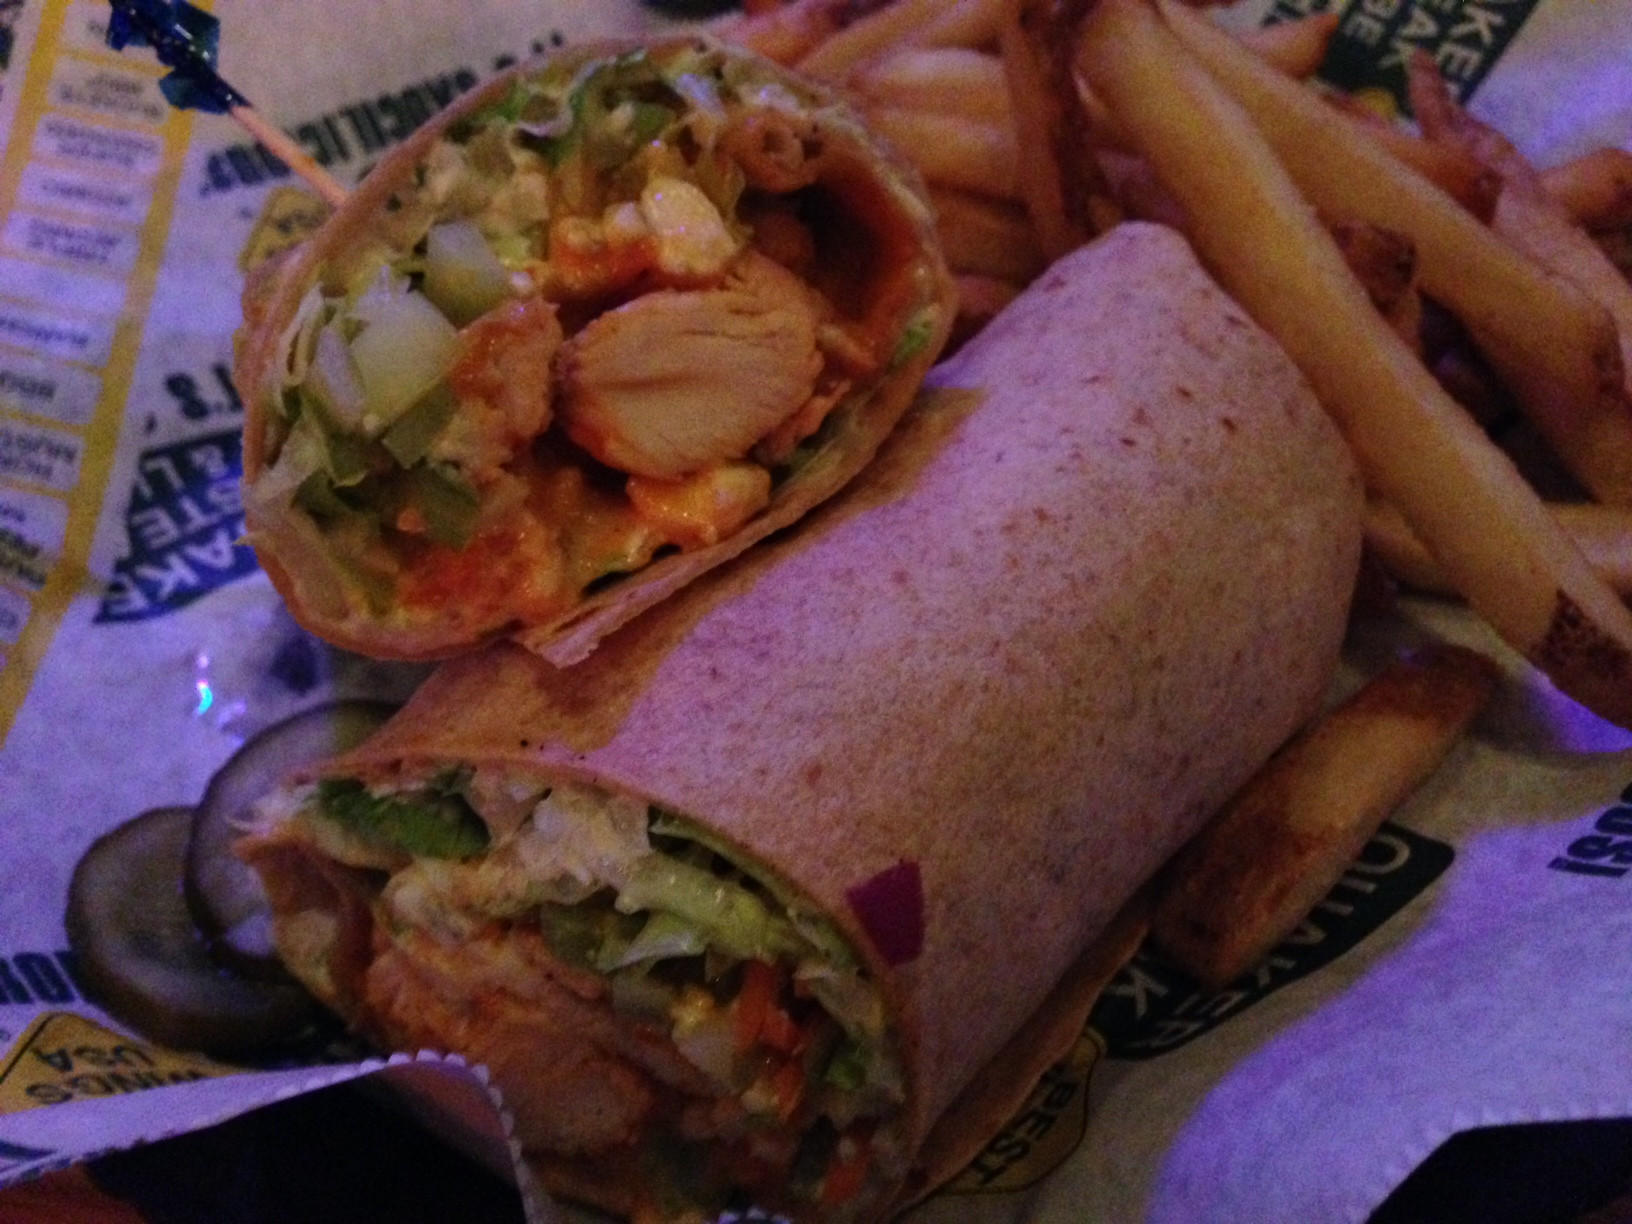 Buffalo Wild Wings Grilled Chicken Wrap
 Good wings mediocre entrees the norm at Quaker Steak